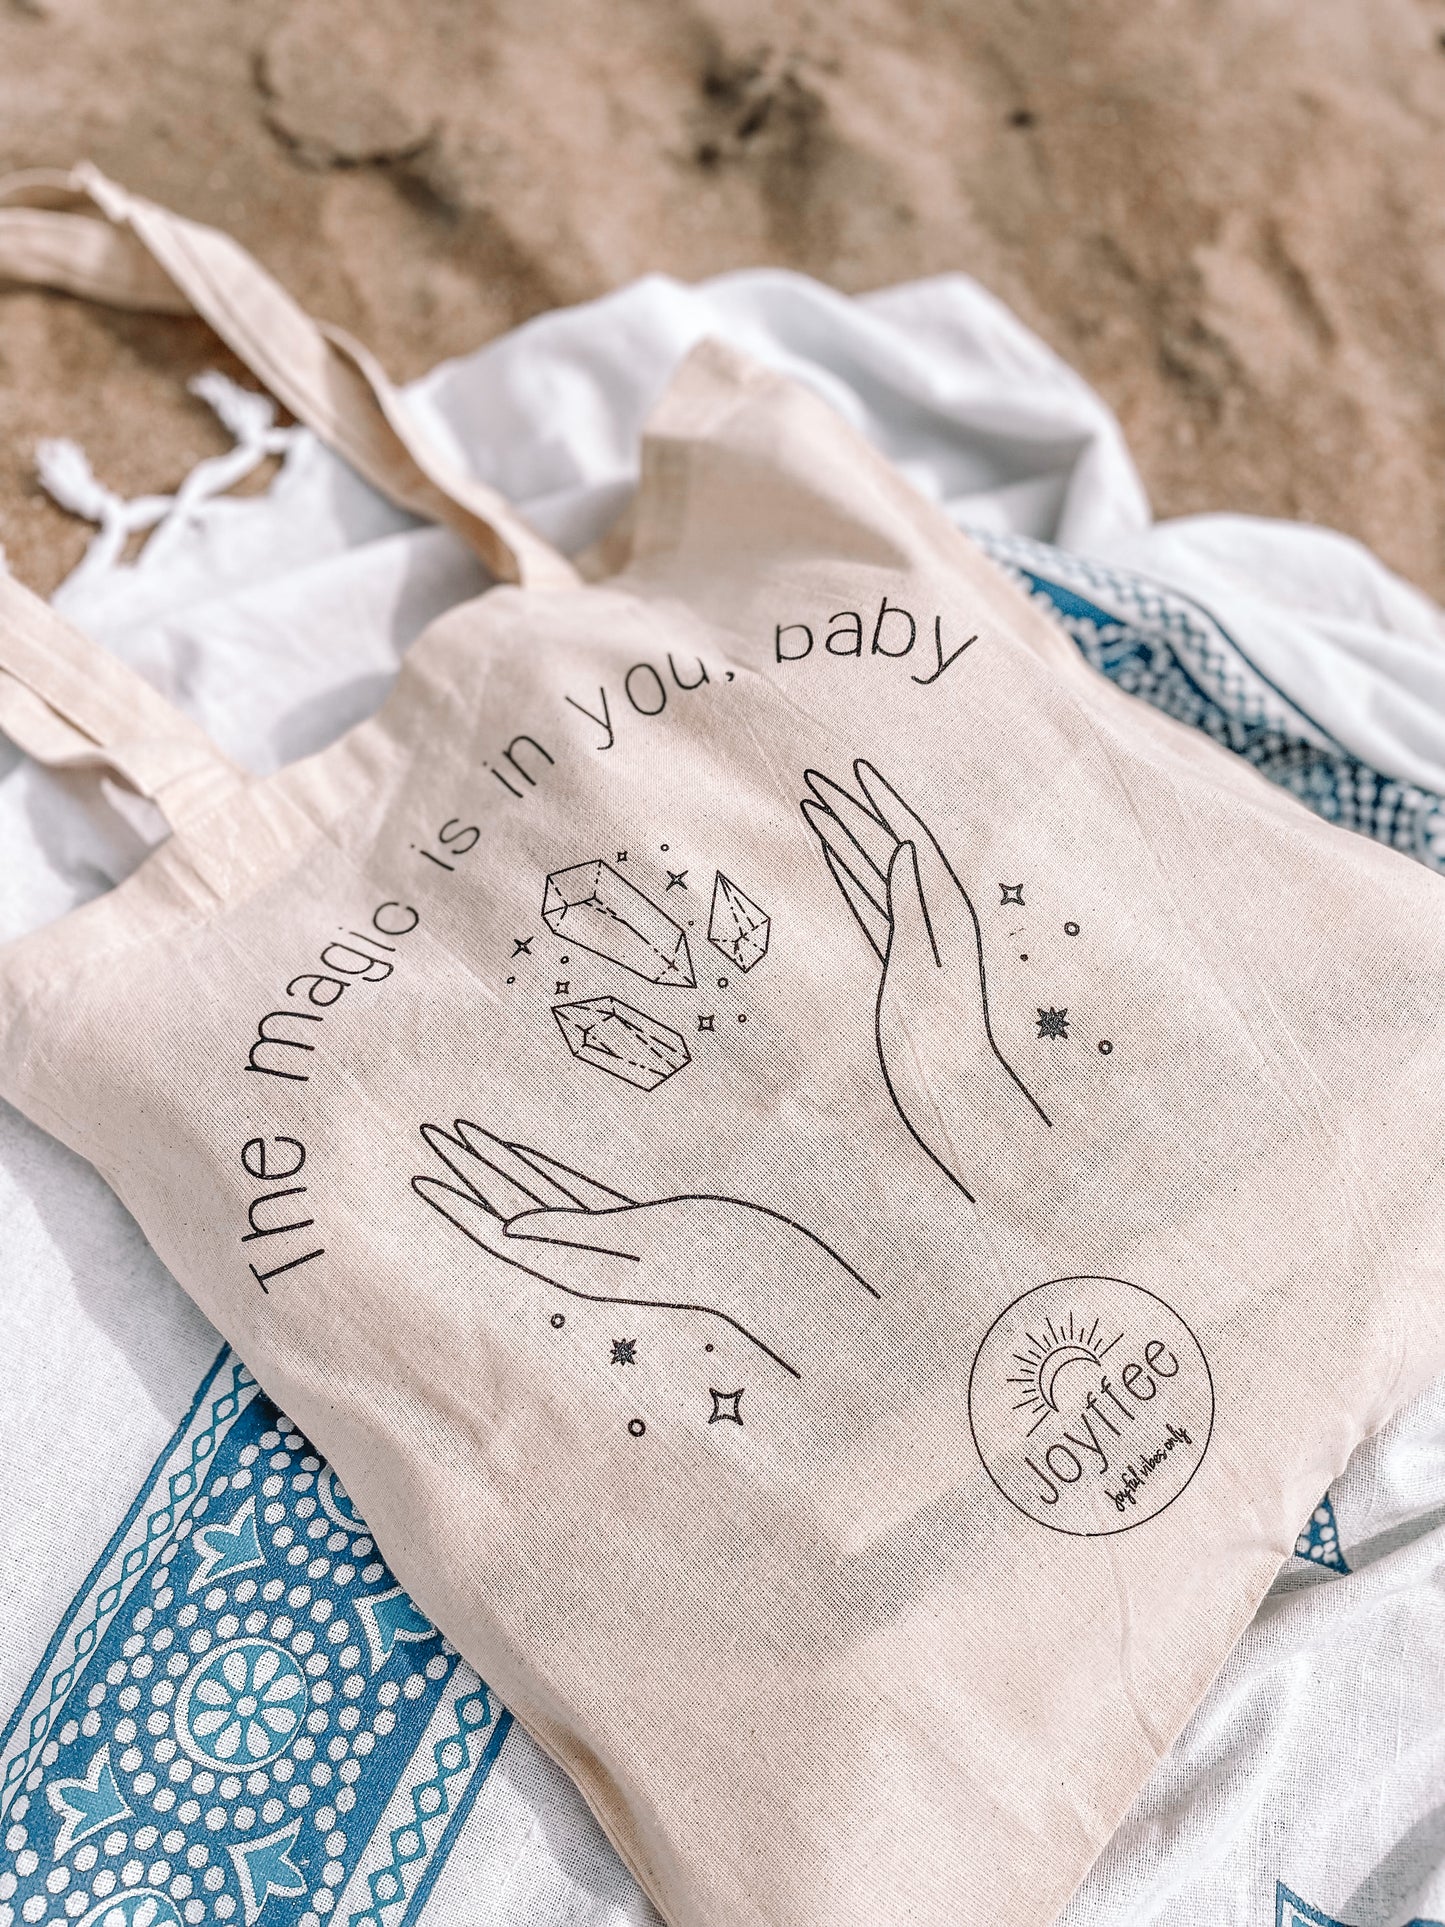 ☾ "The Magic is in you, baby!" tote bag